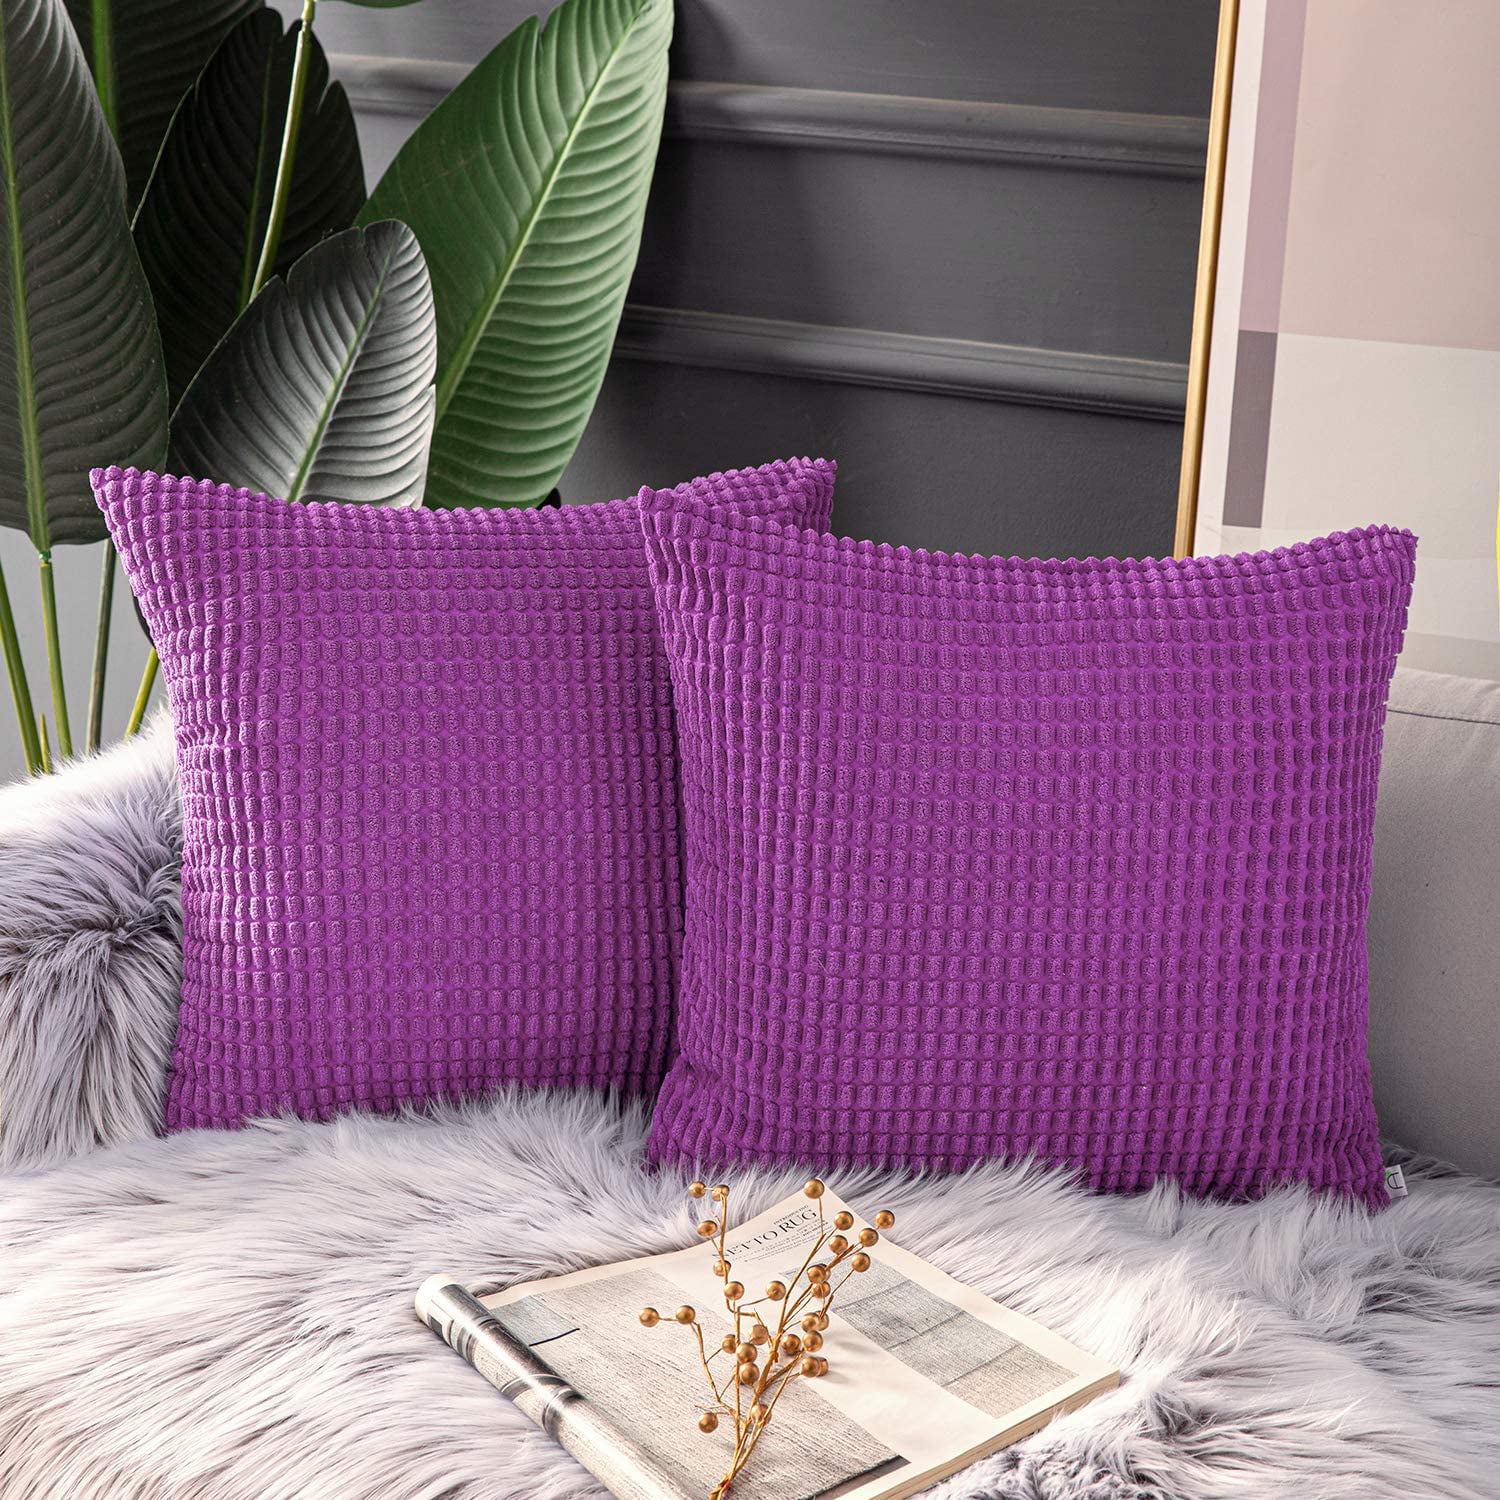 Details about   Cotton Throw Pillow Covers Sofa Cushion Cases Soft Solid Rectangle Violet 